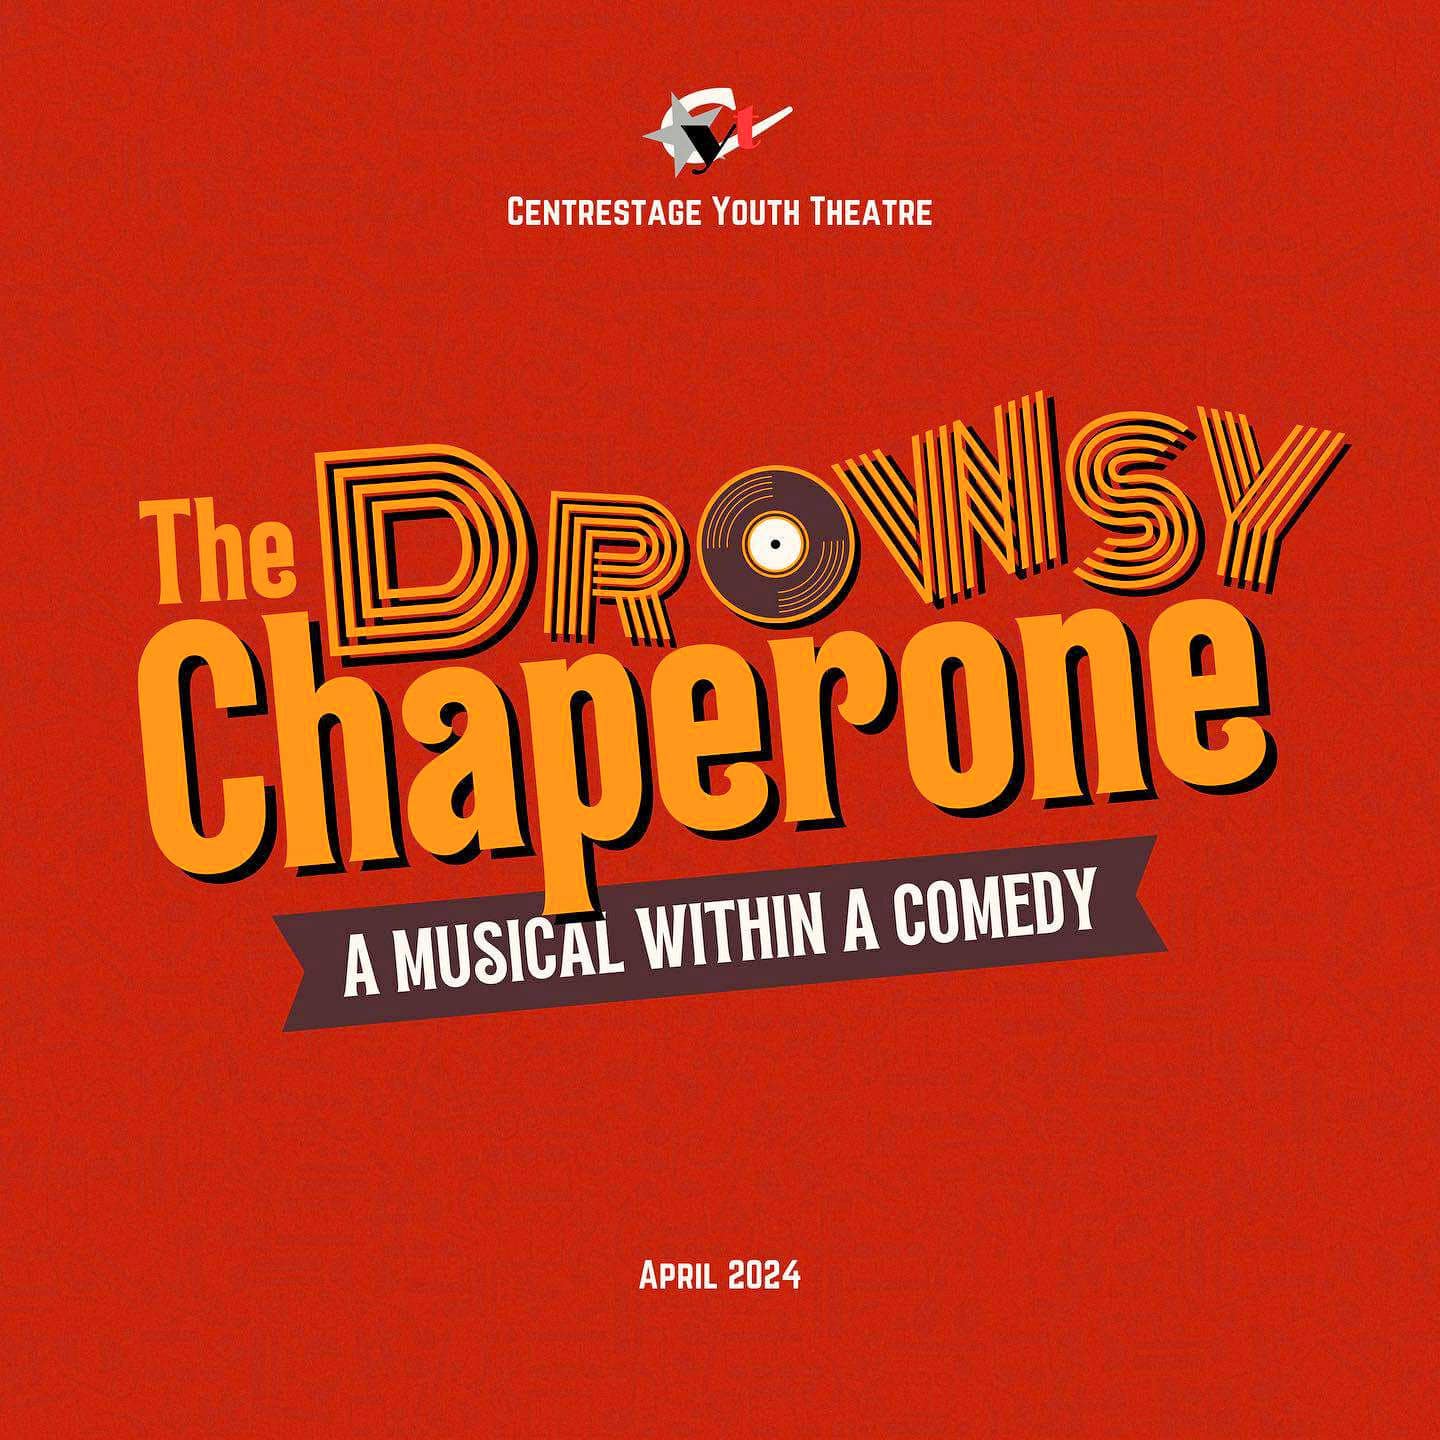 The Drowsy Chaperone musical poster by Centrestage Youth Theatre, April 2024.